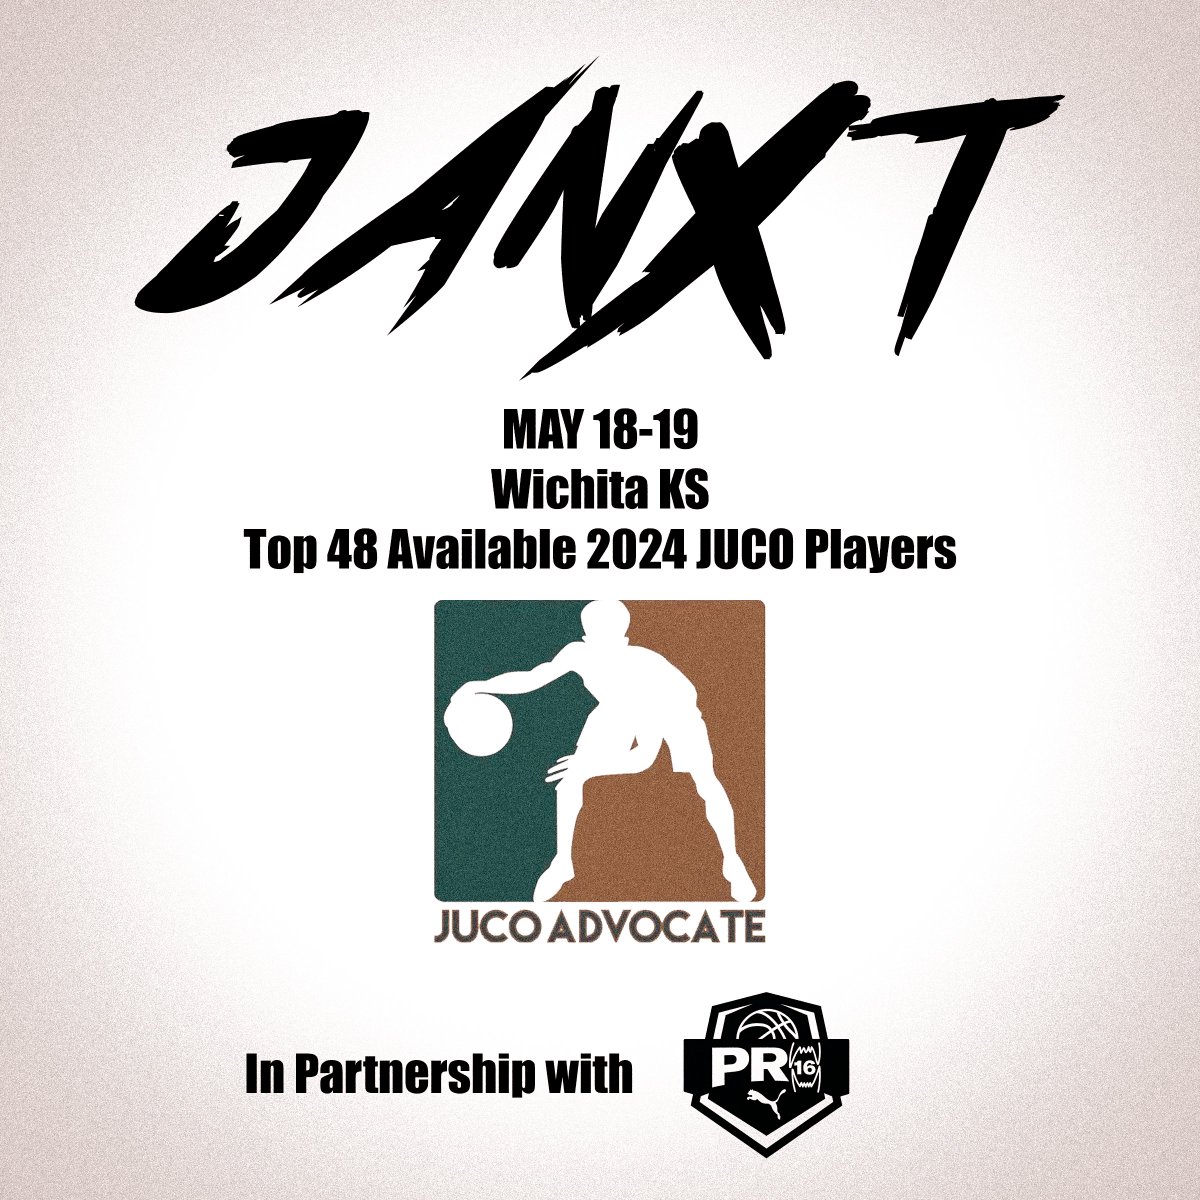 The next JANXT Invite goes to 6'5 Mohamed Kante of Georgia Highlands. In partnership with @NxtProHoops @PRO16League and @PUMAHoops May 18-19 Wichita KS Stay tuned for more invitations and exciting updates!!!